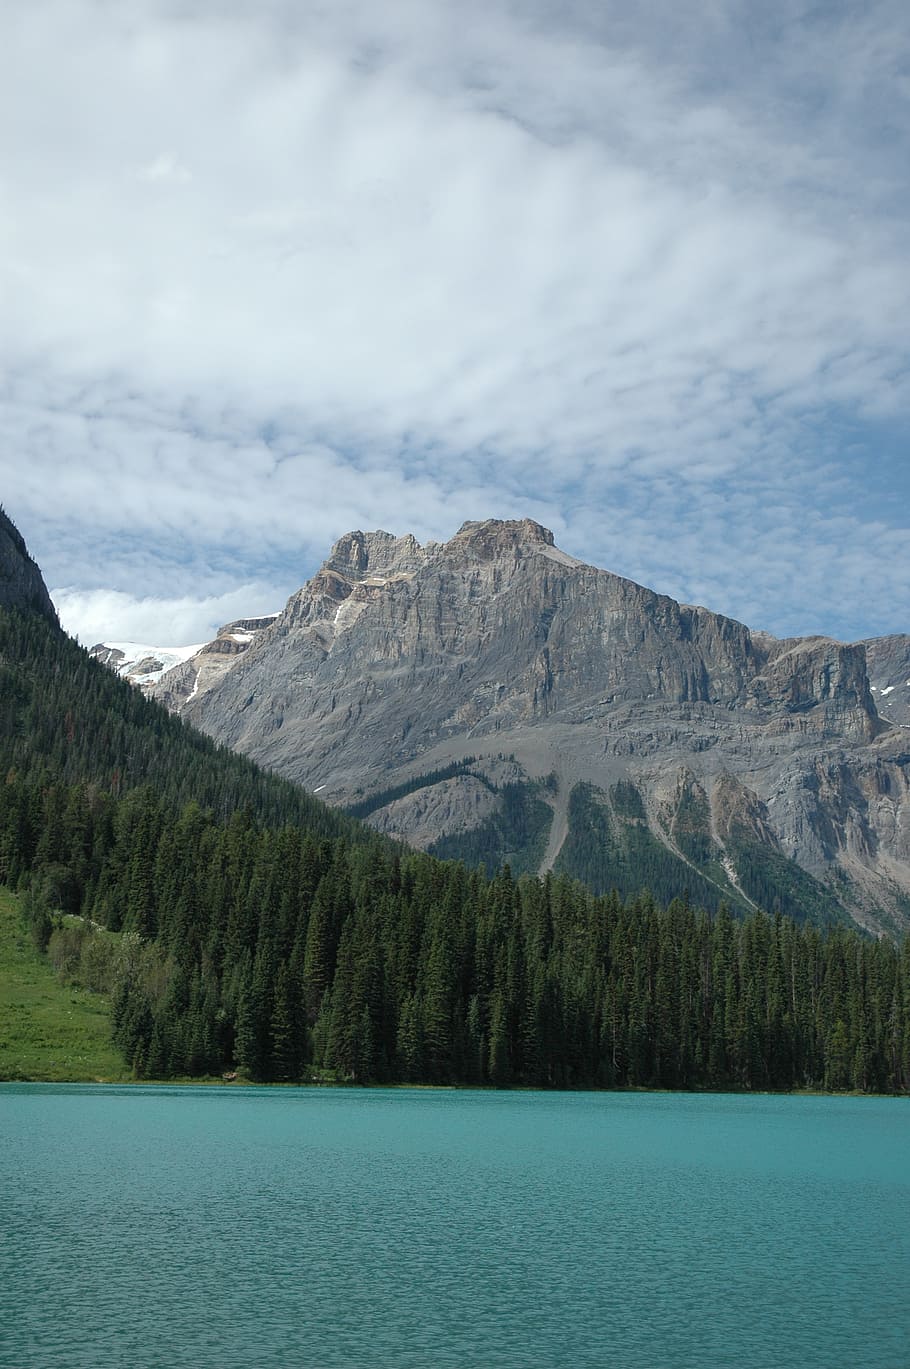 emerald lake, rocky mountains, canada, lake, park, forest, landscape, banff, scenics - nature, beauty in nature